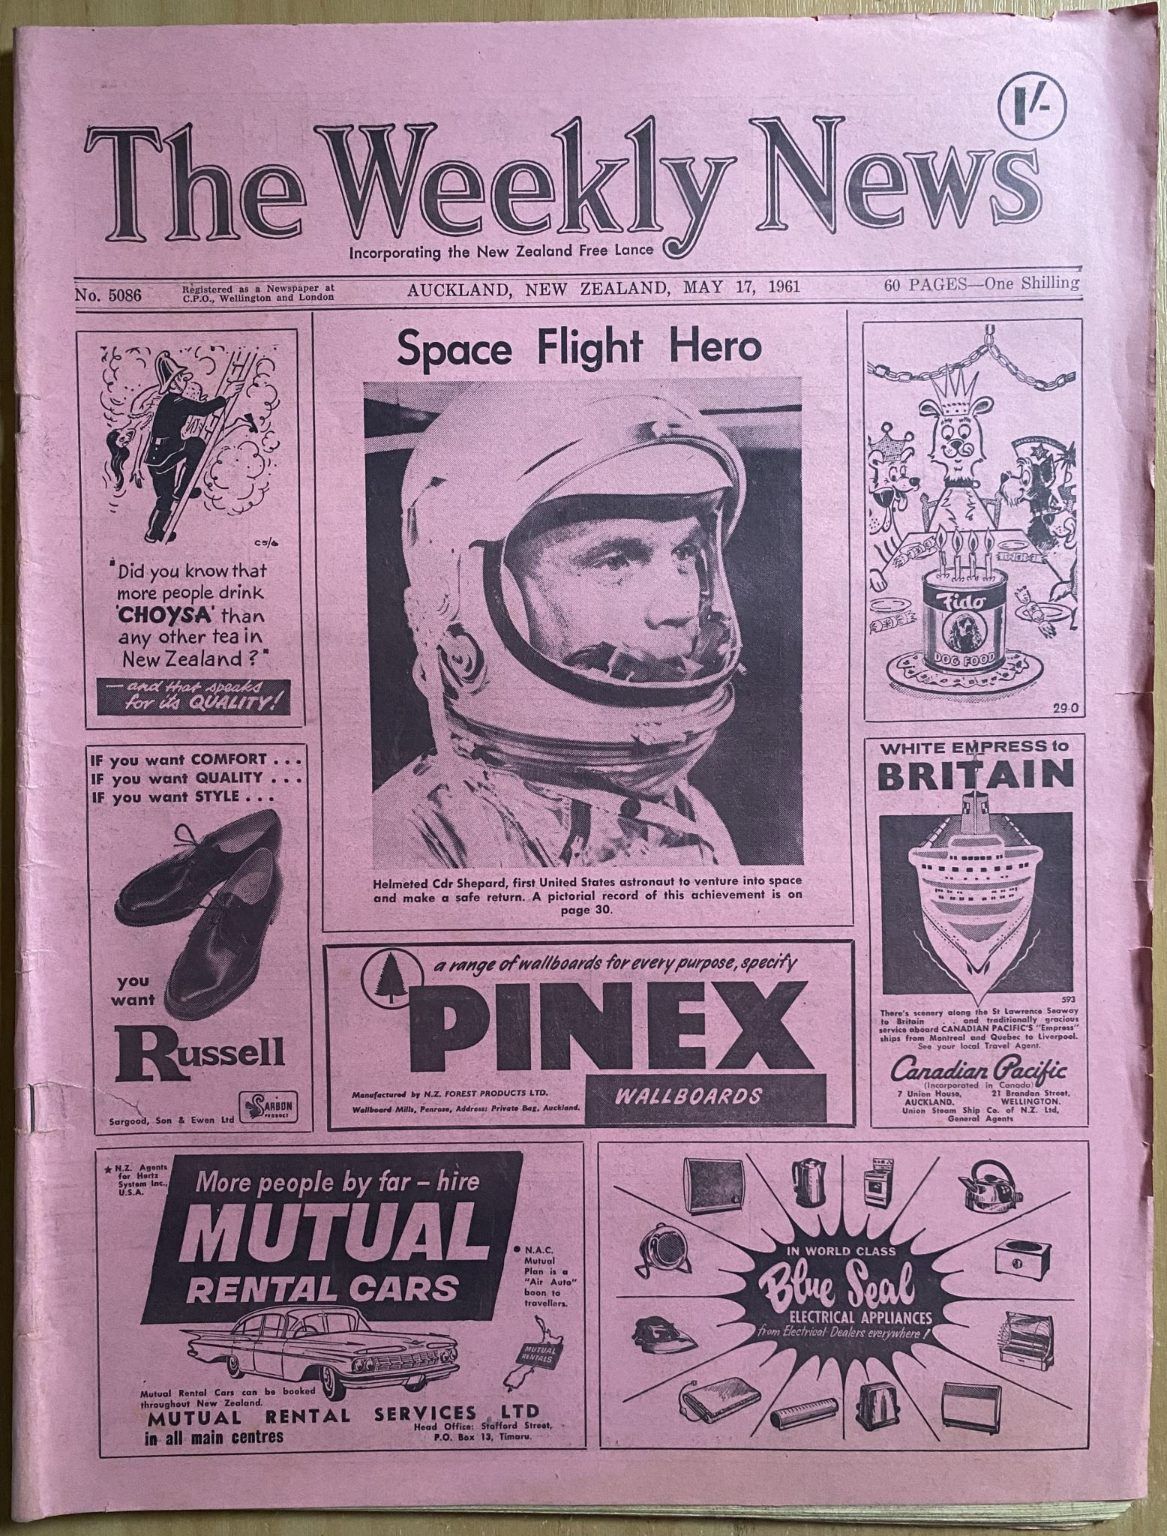 OLD NEWSPAPER: The Weekly News, No. 5086, 17 May 1961